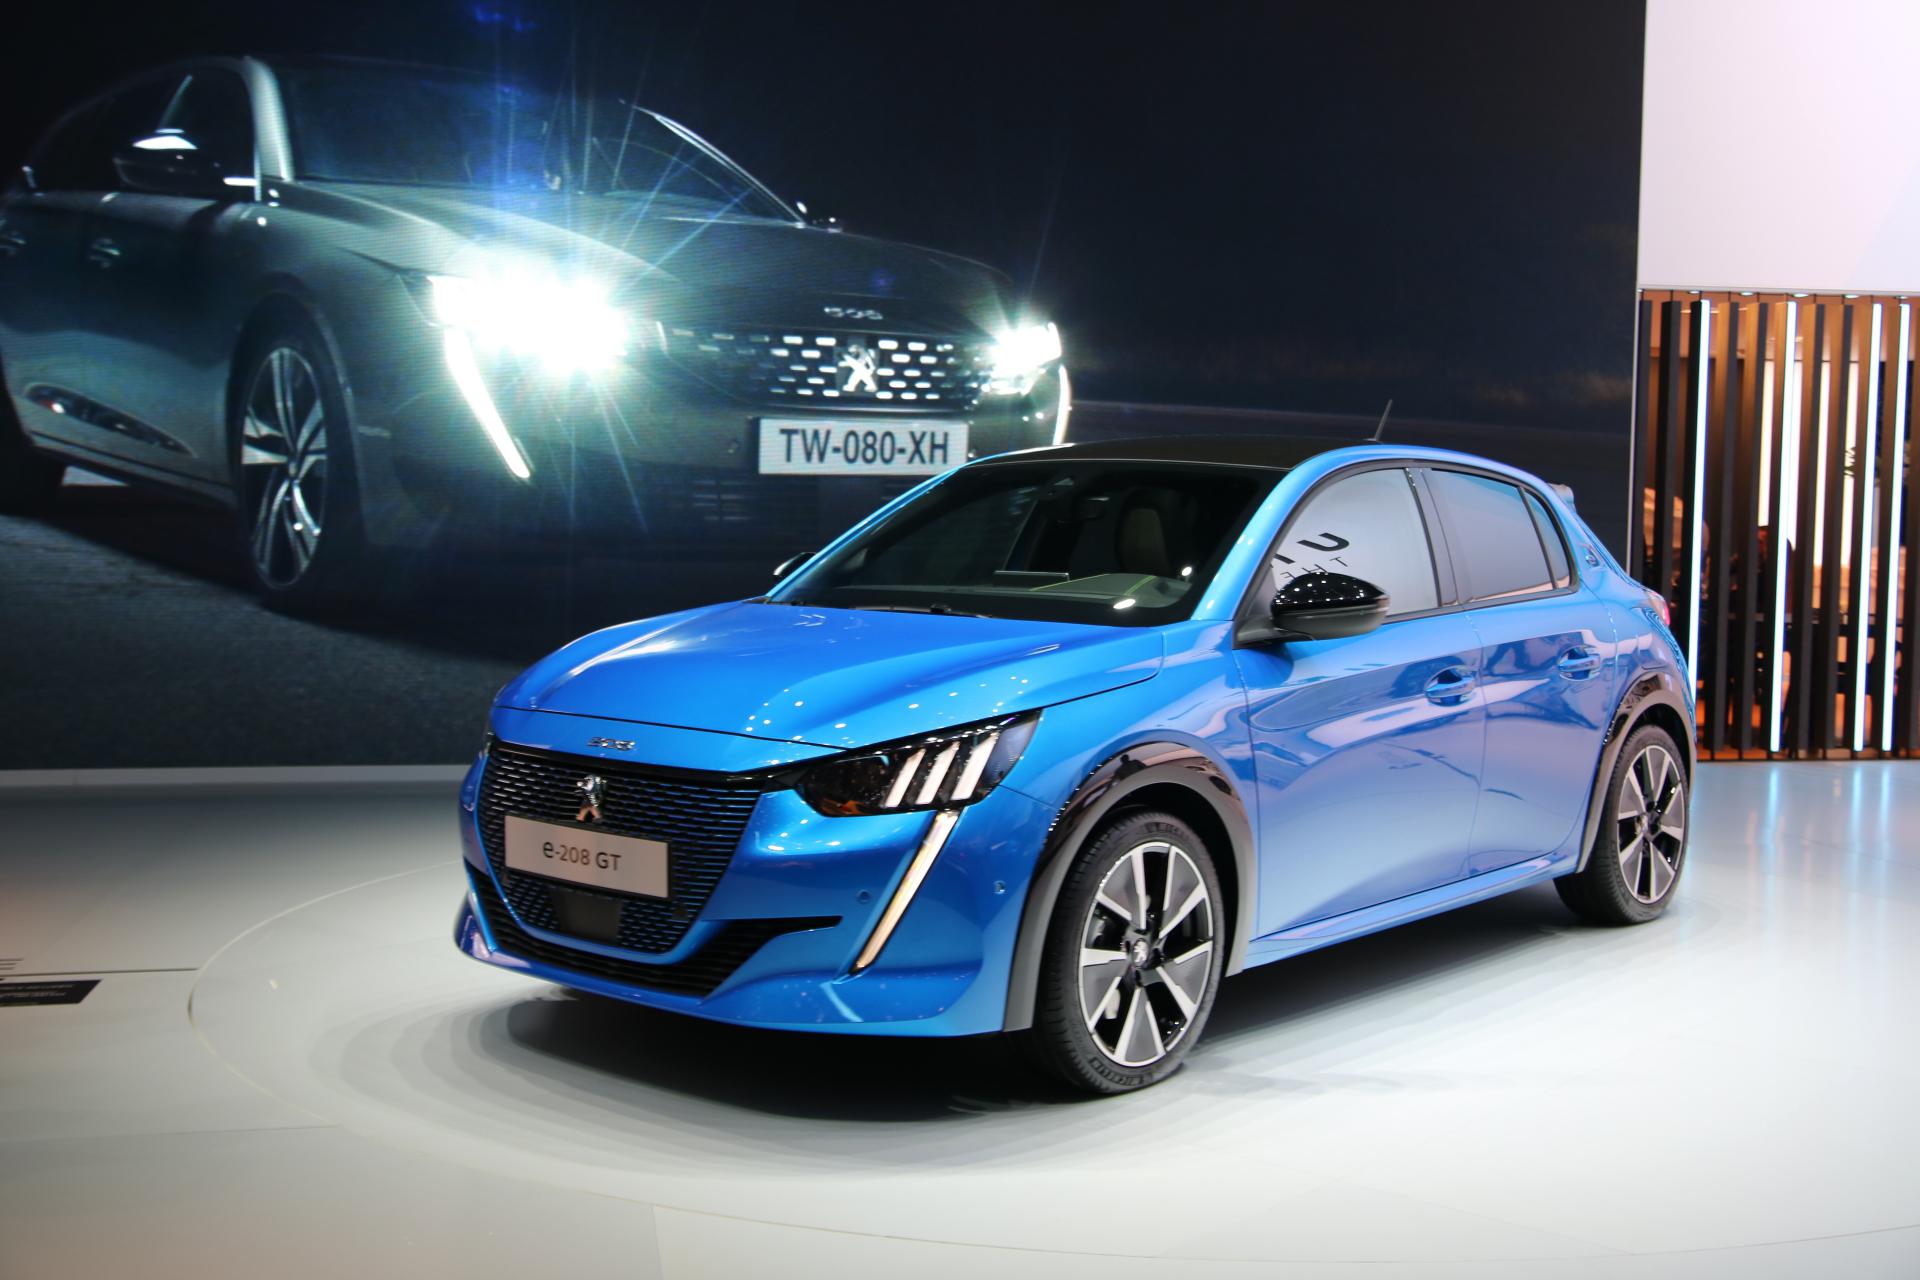 2019 nowy Peugeot 208 Super Express